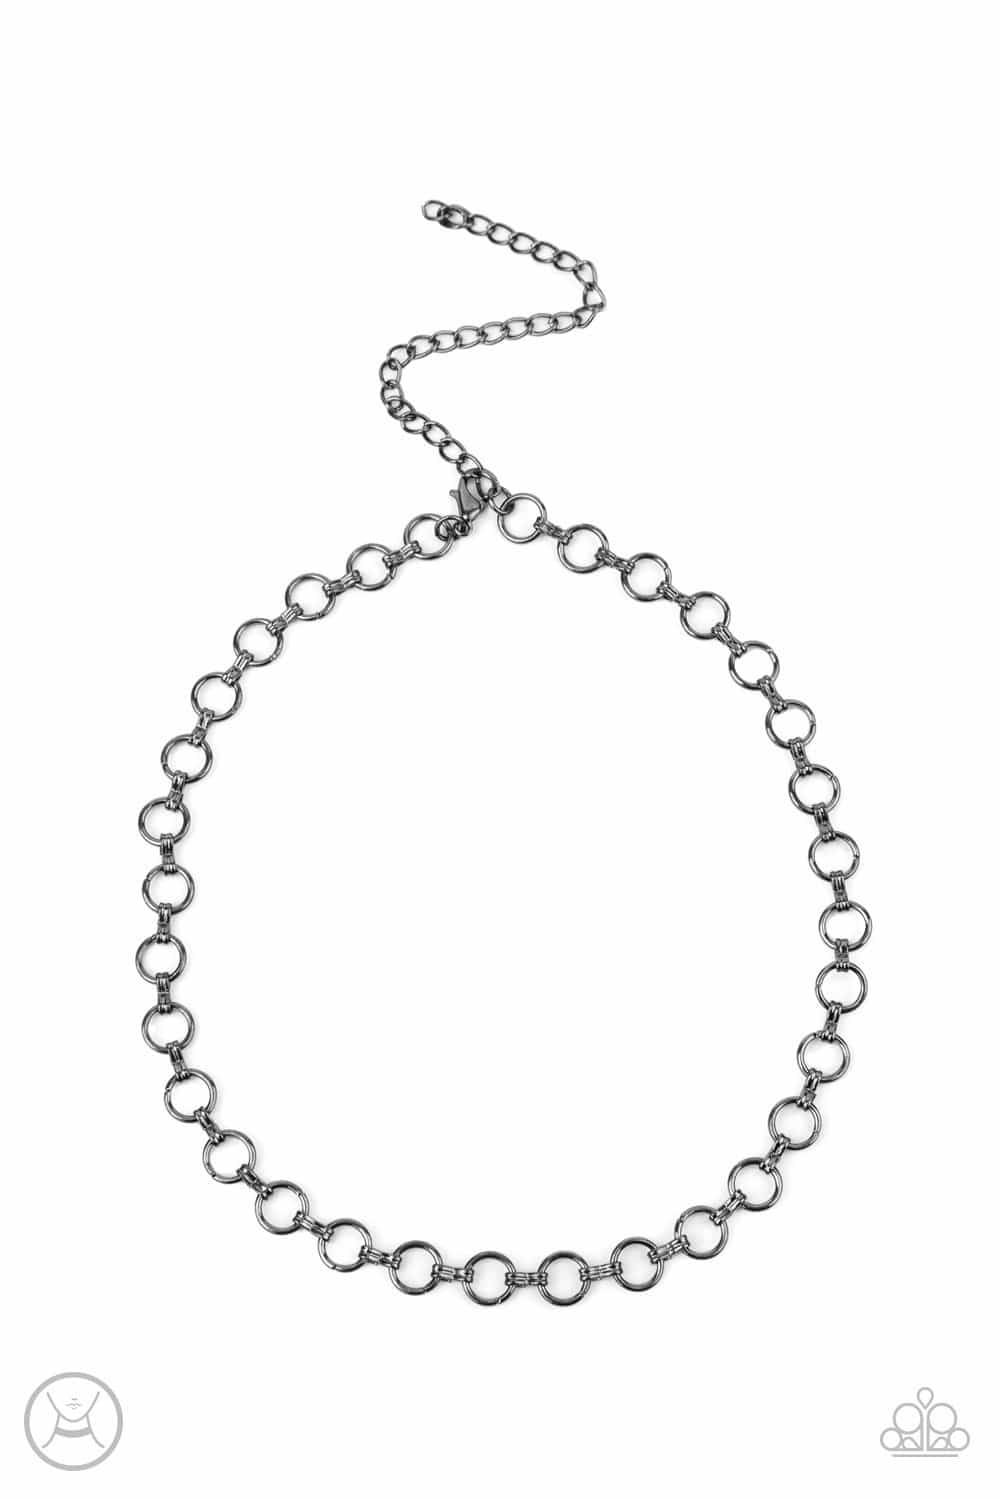 A183 - Insta Connection Necklace by Paparazzi Accessories on Fancy5Fashion.com